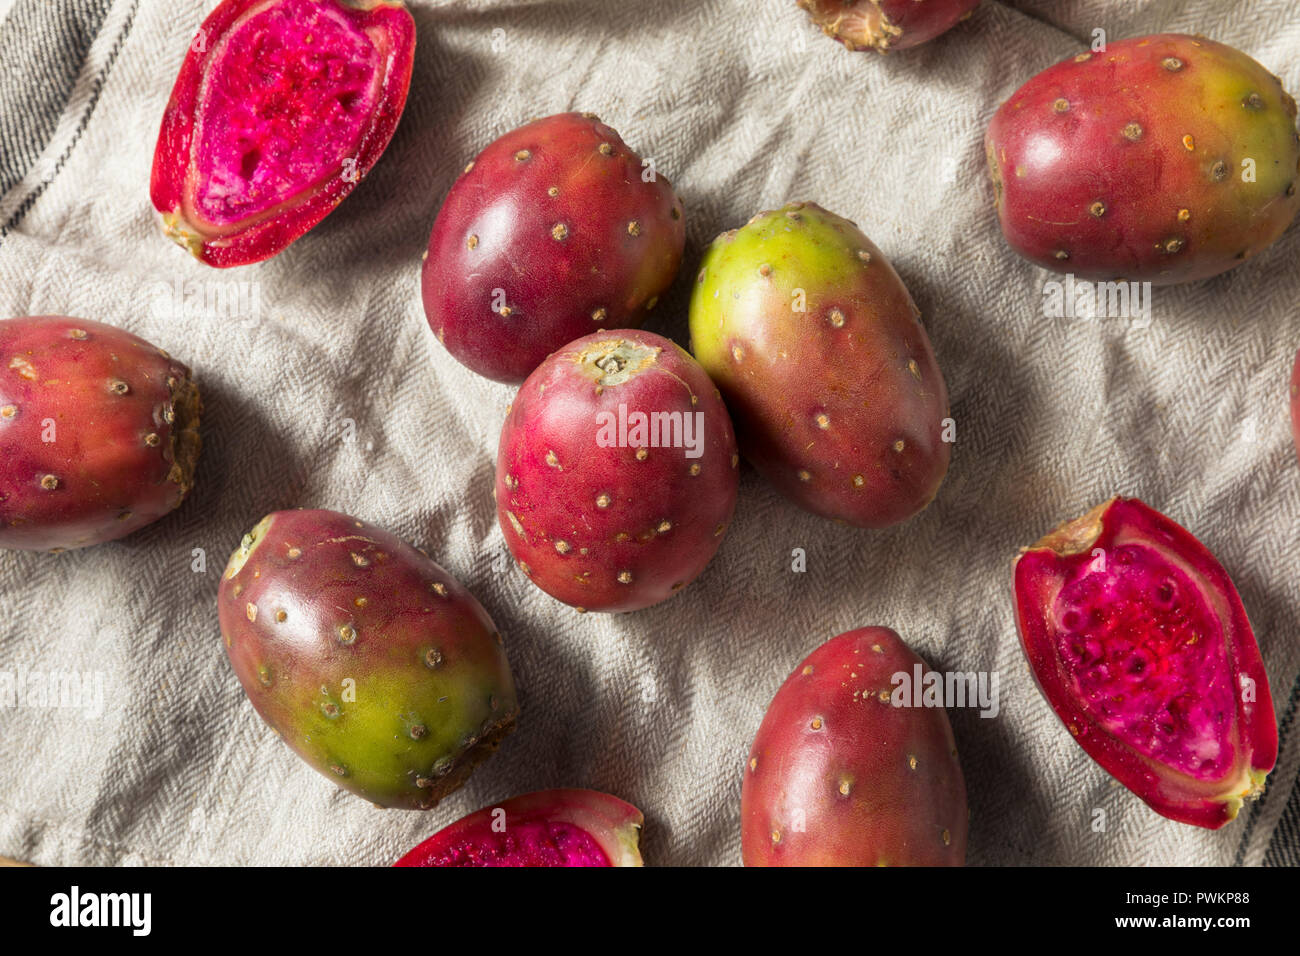 Organic Red Prickly Pears Ready to Eat Stock Photo